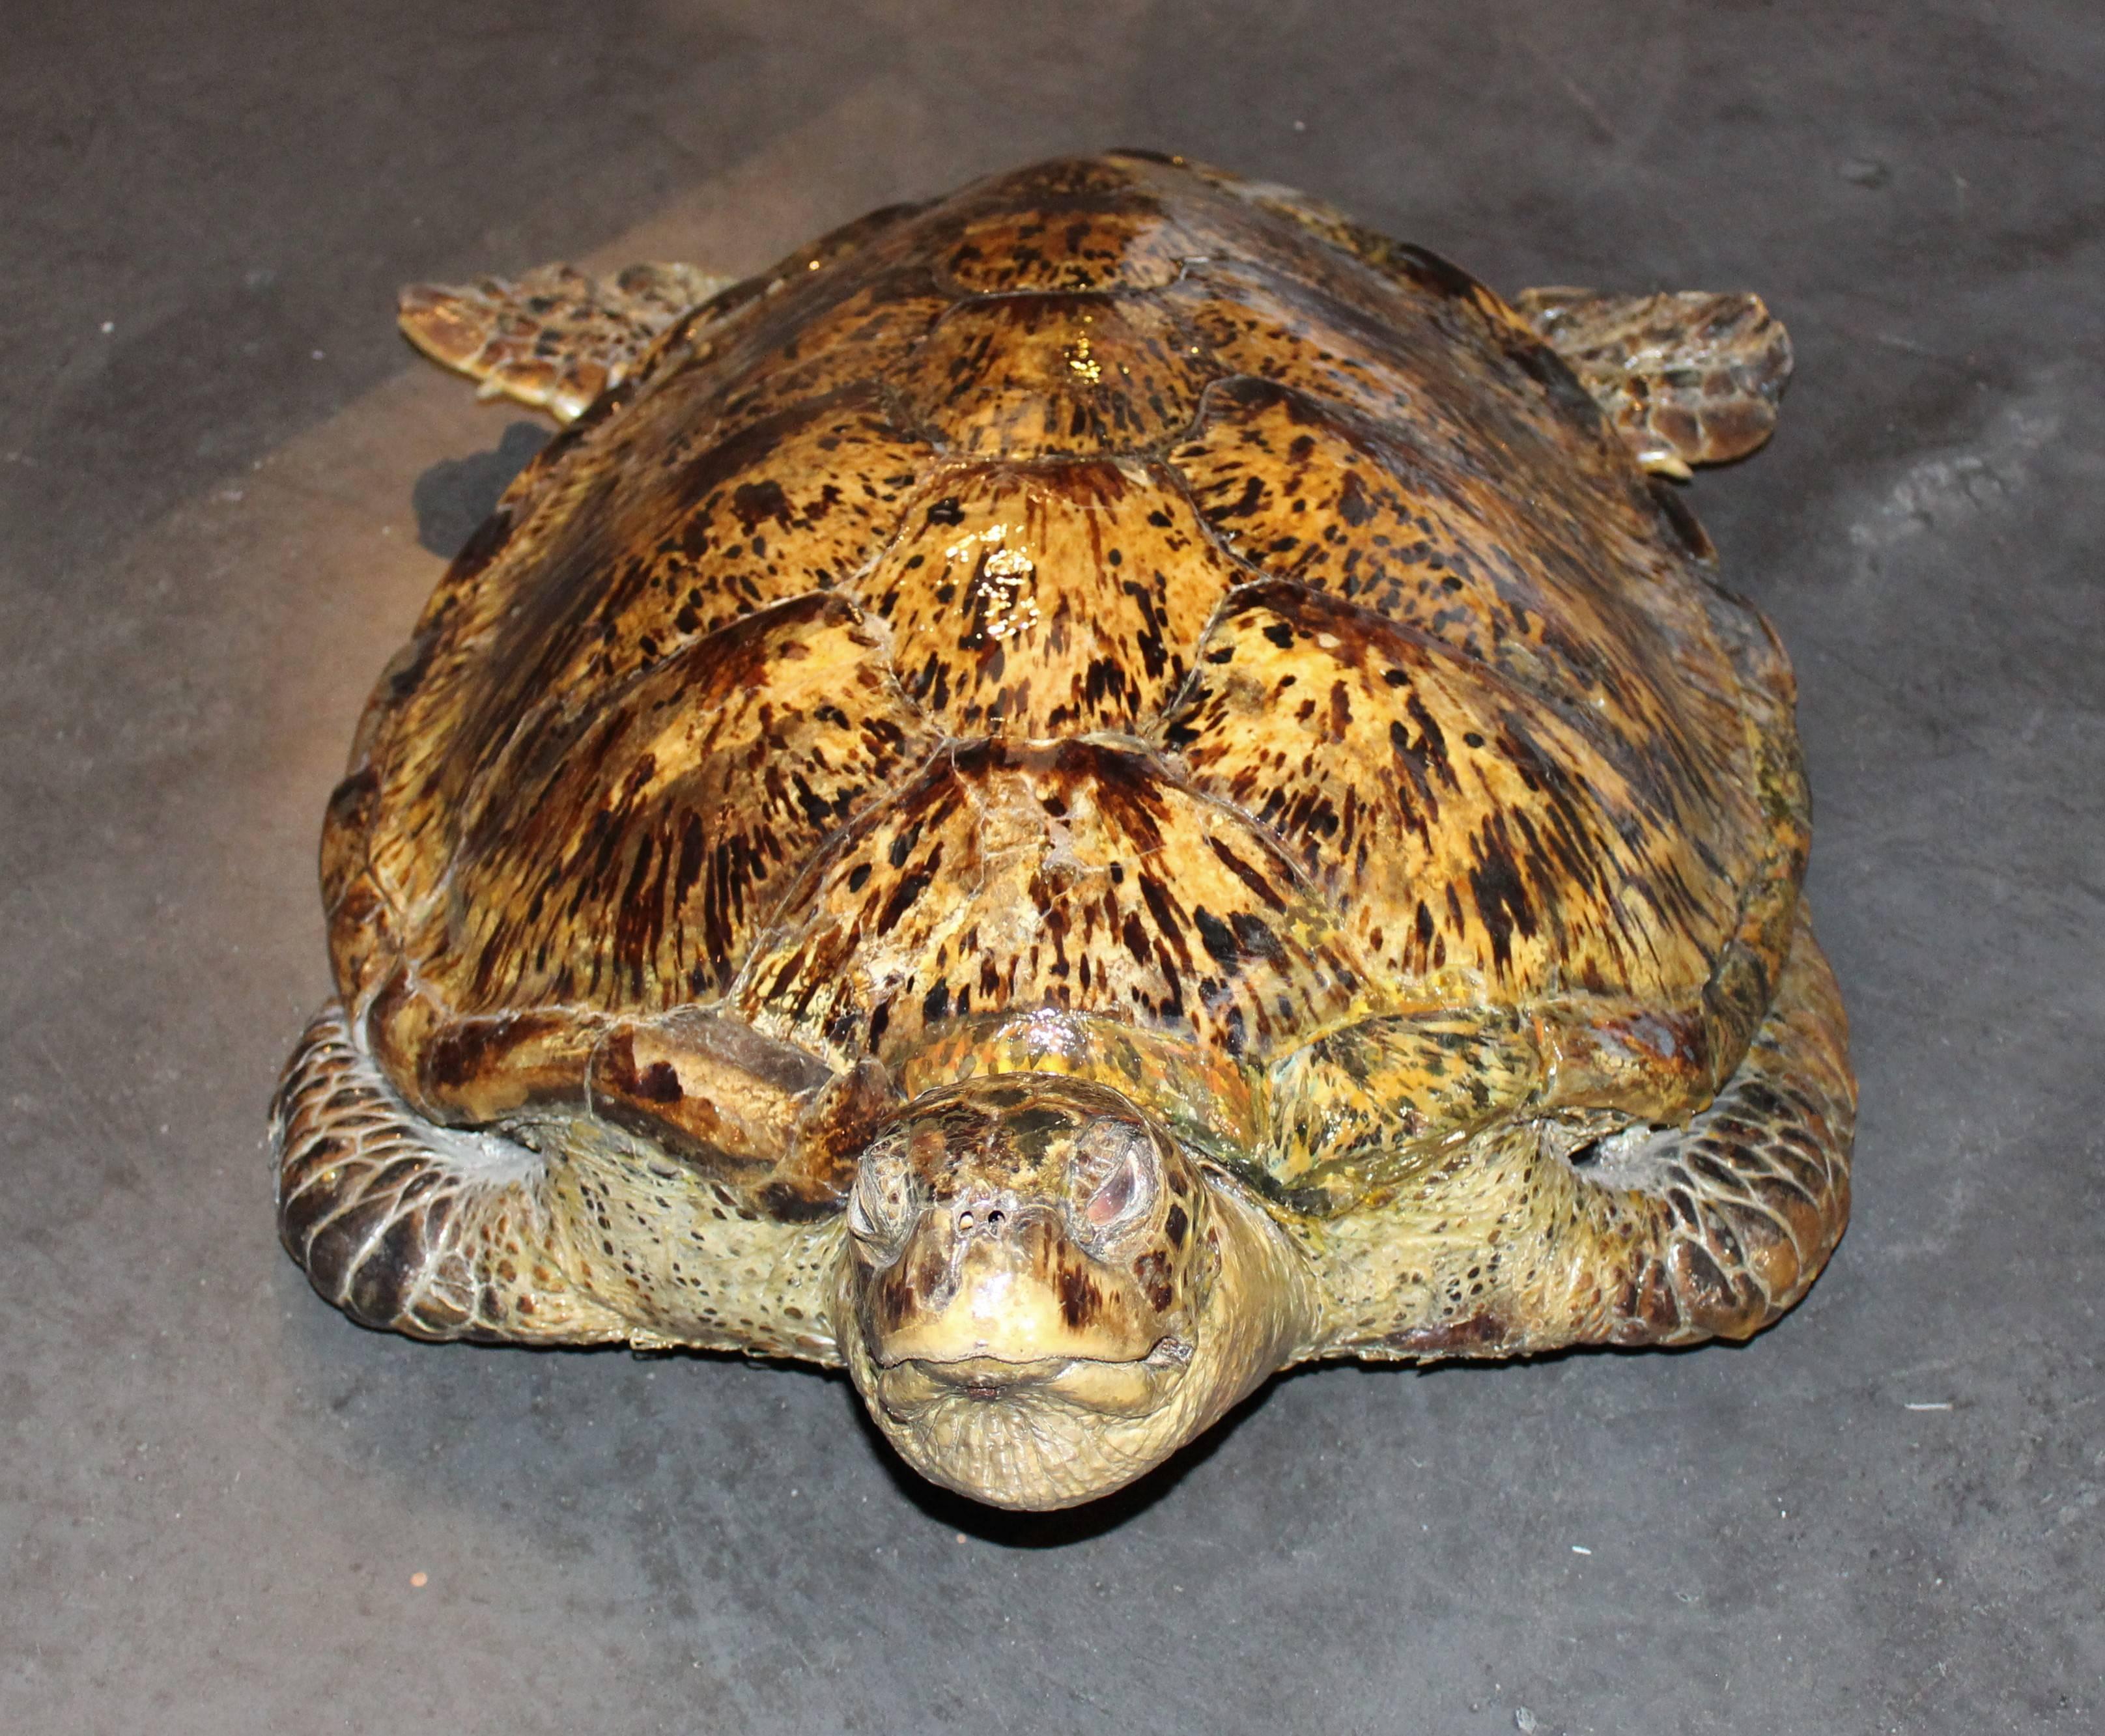 This Old Turtle is in a exceptionel condition.
large size and the shell has a nice patina.